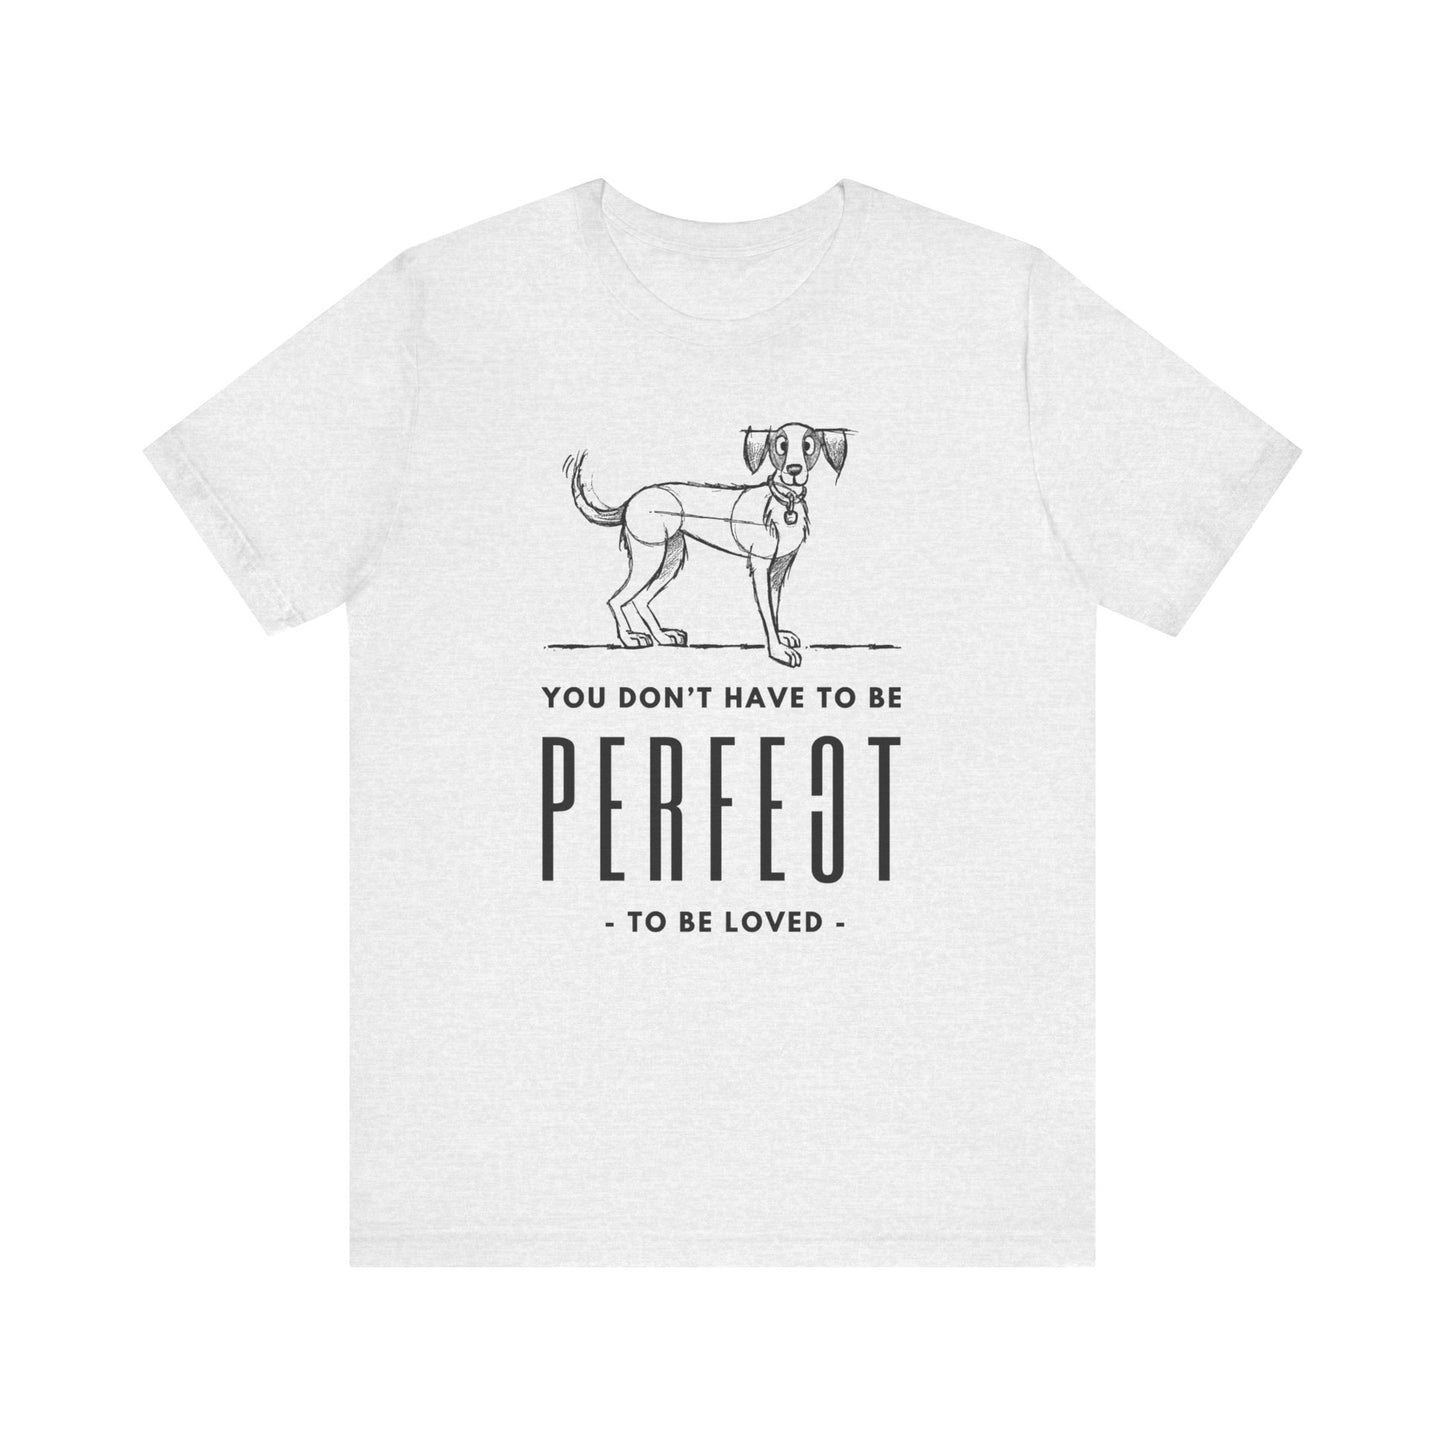  The Dogs Pure Love unisex t-shirt in ash grey showcases the slogan 'You don't have to be perfect to be loved,' against a white background.